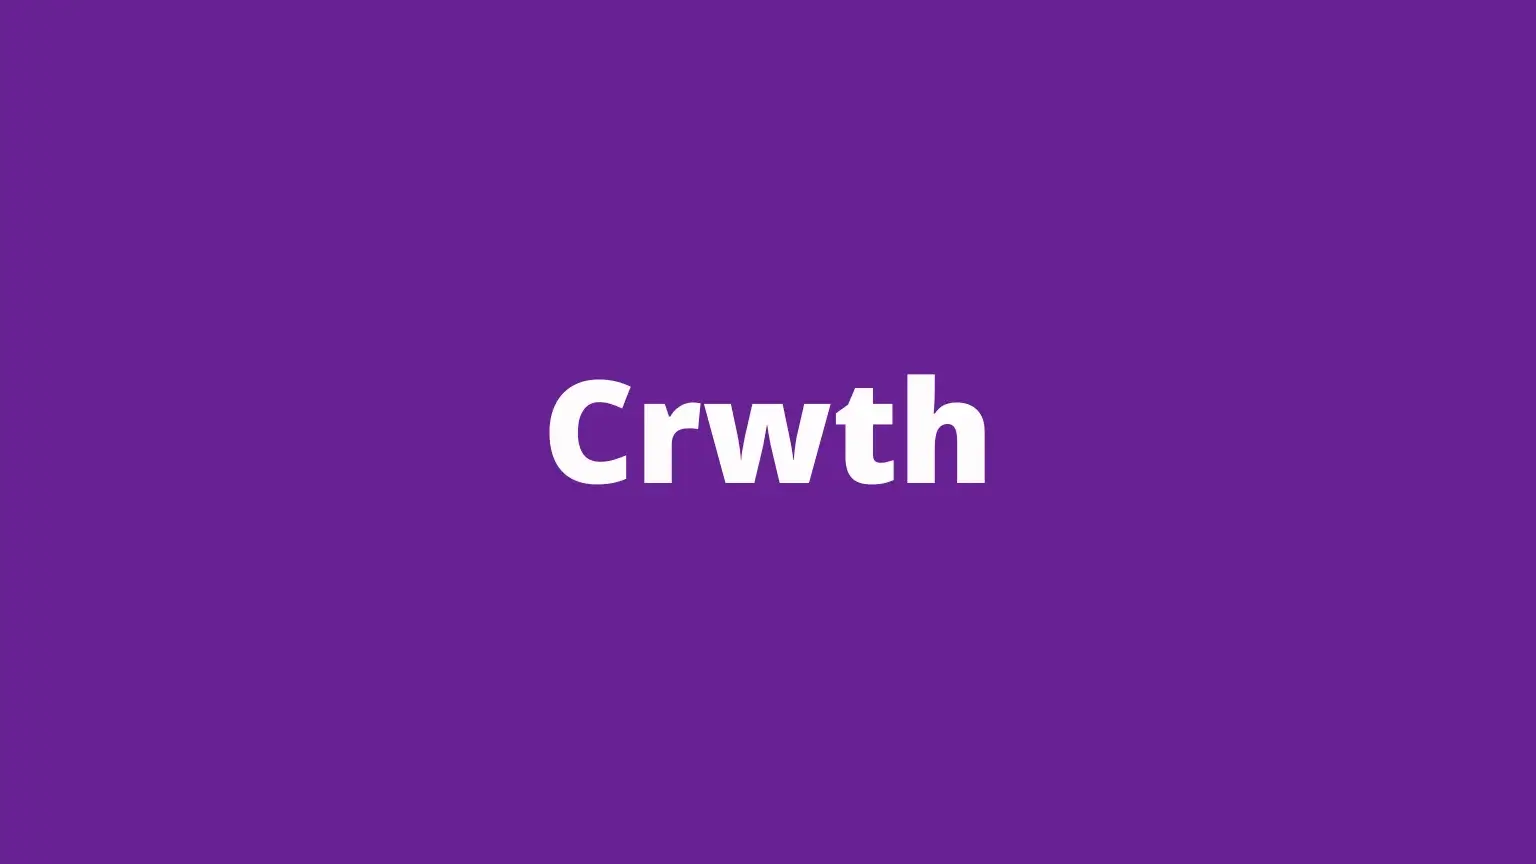 The word crwth and meaning